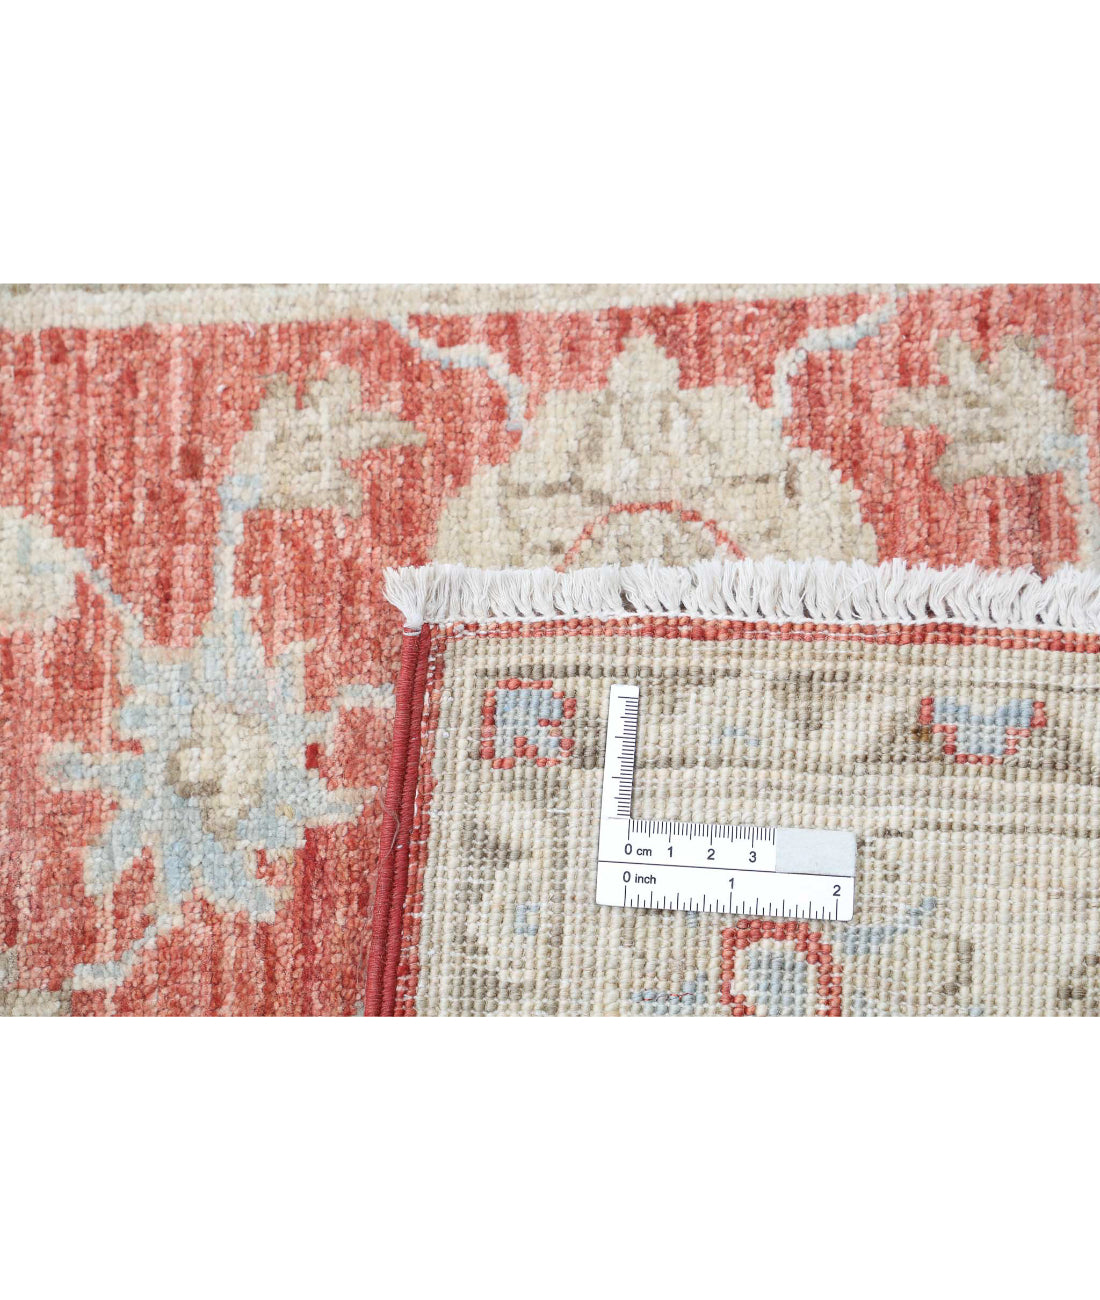 Ziegler 2'5'' X 8'0'' Hand-Knotted Wool Rug 2'5'' x 8'0'' (73 X 240) / Red / Ivory